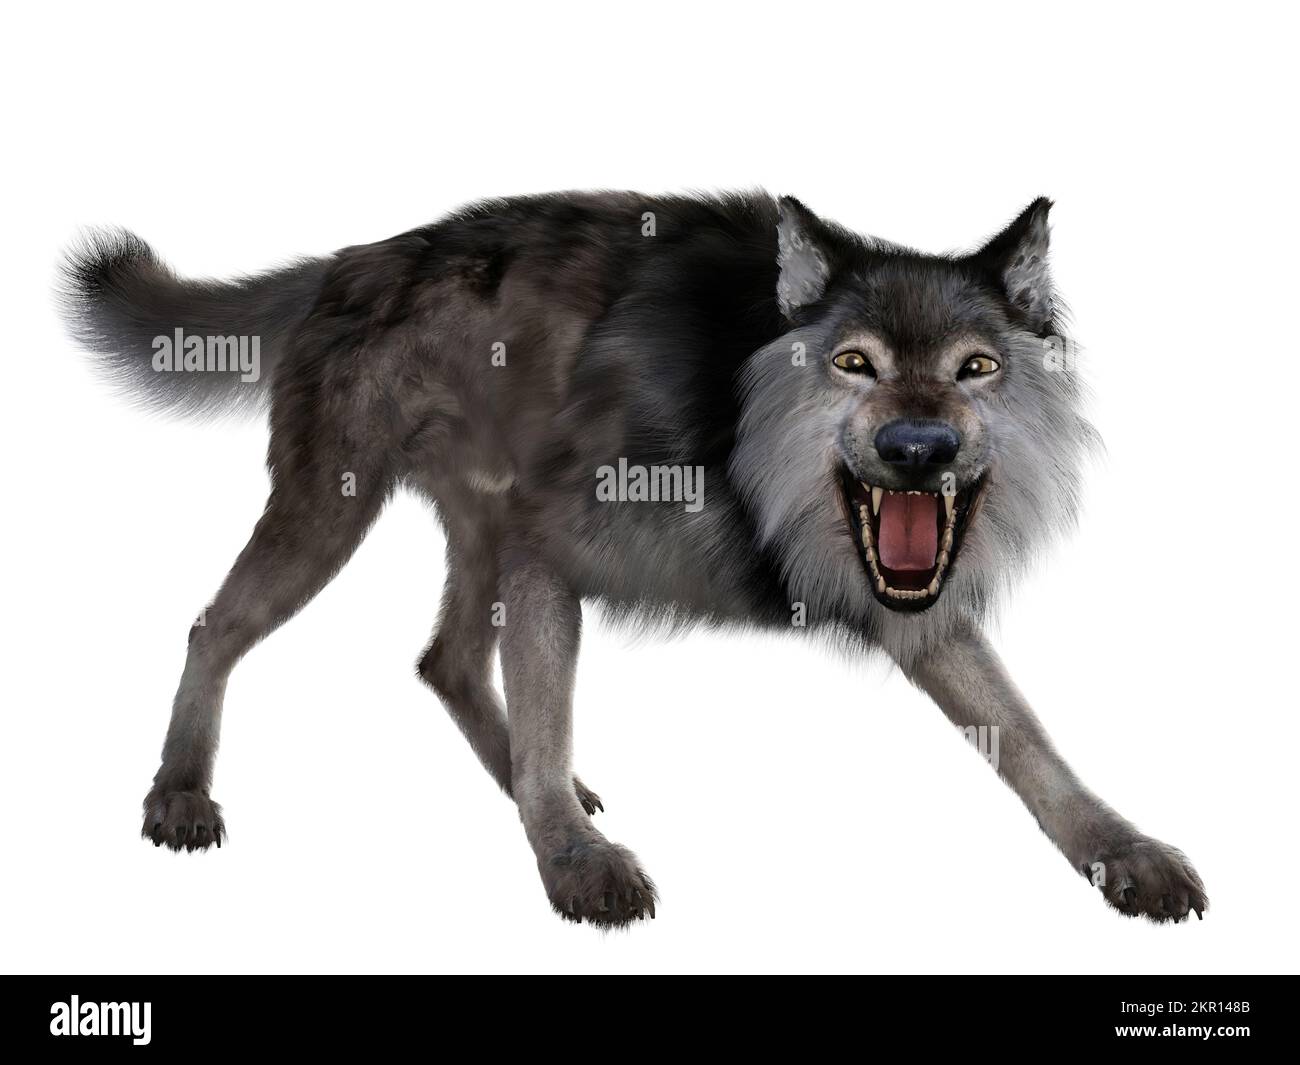 The carnivorous Dire Wolf lived in North and South America during the Pleistocene Period. Stock Photo